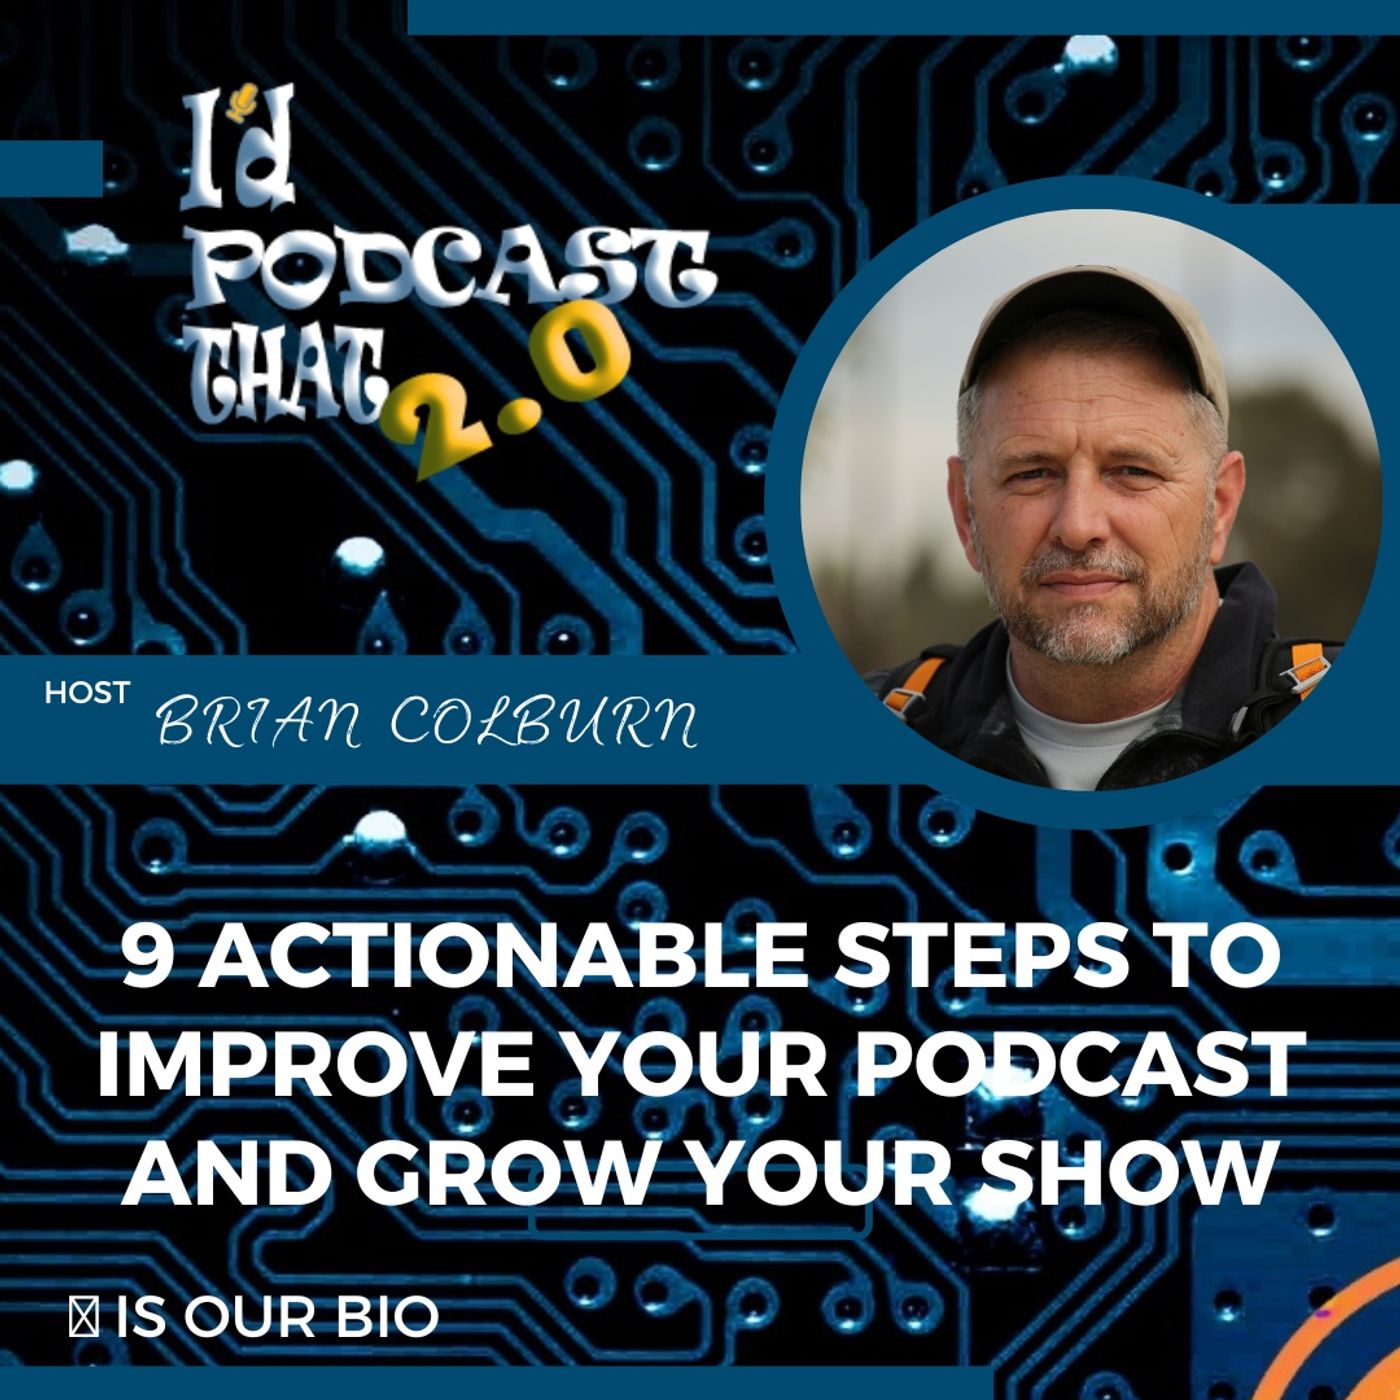 9 Actionable Steps to Improve Your Podcast and Grow Your Show